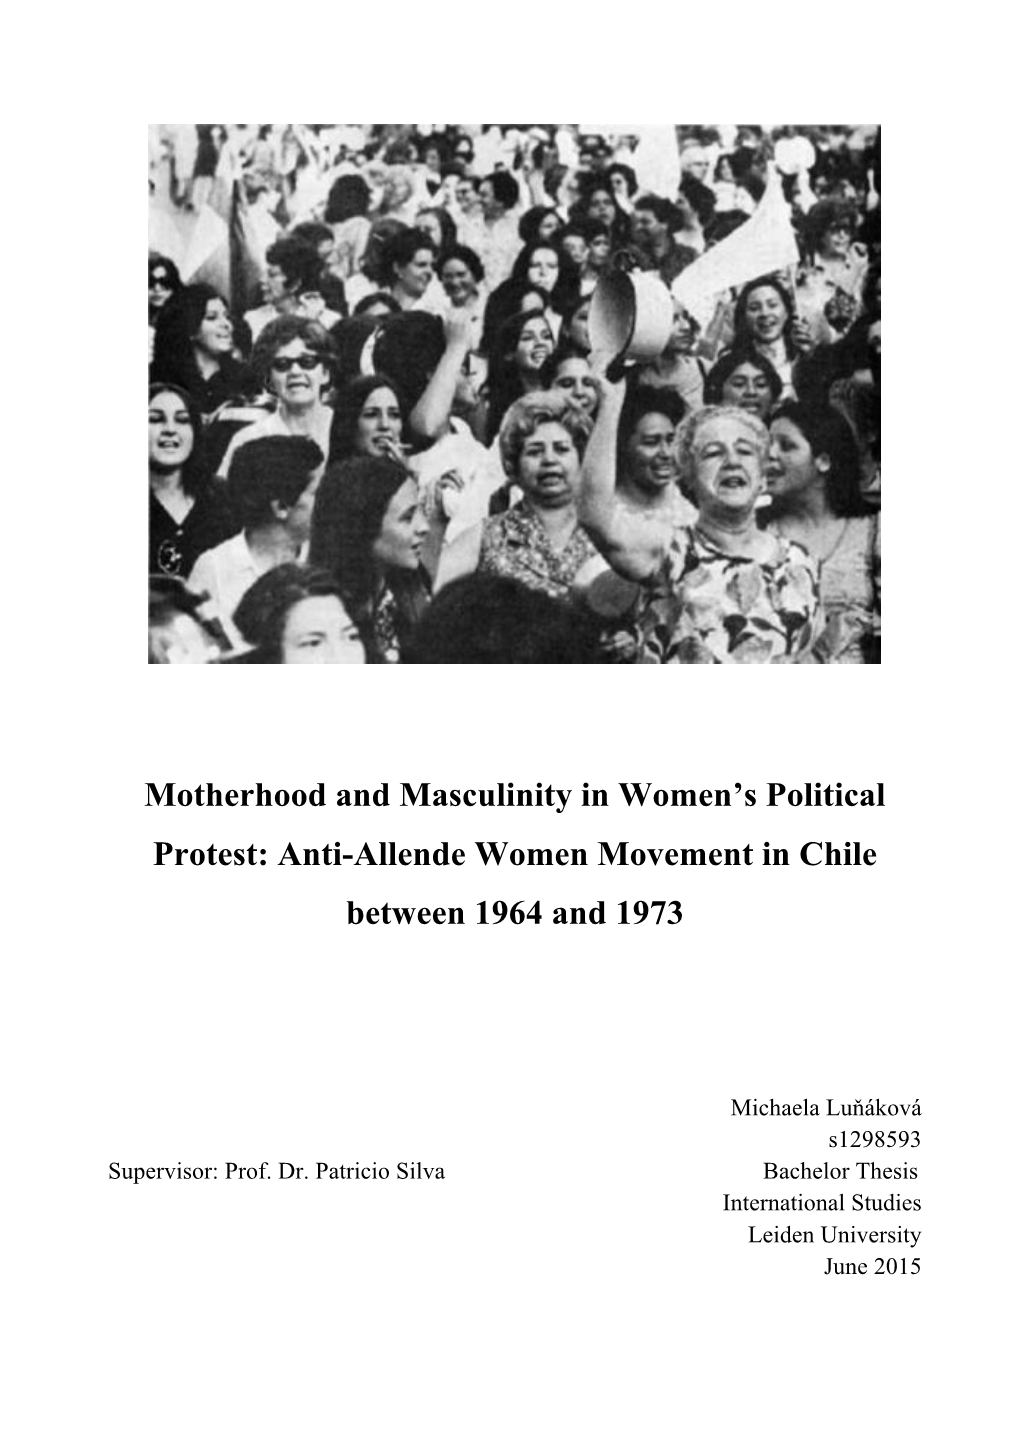 Anti-Allende Women Movement in Chile Between 1964 and 1973